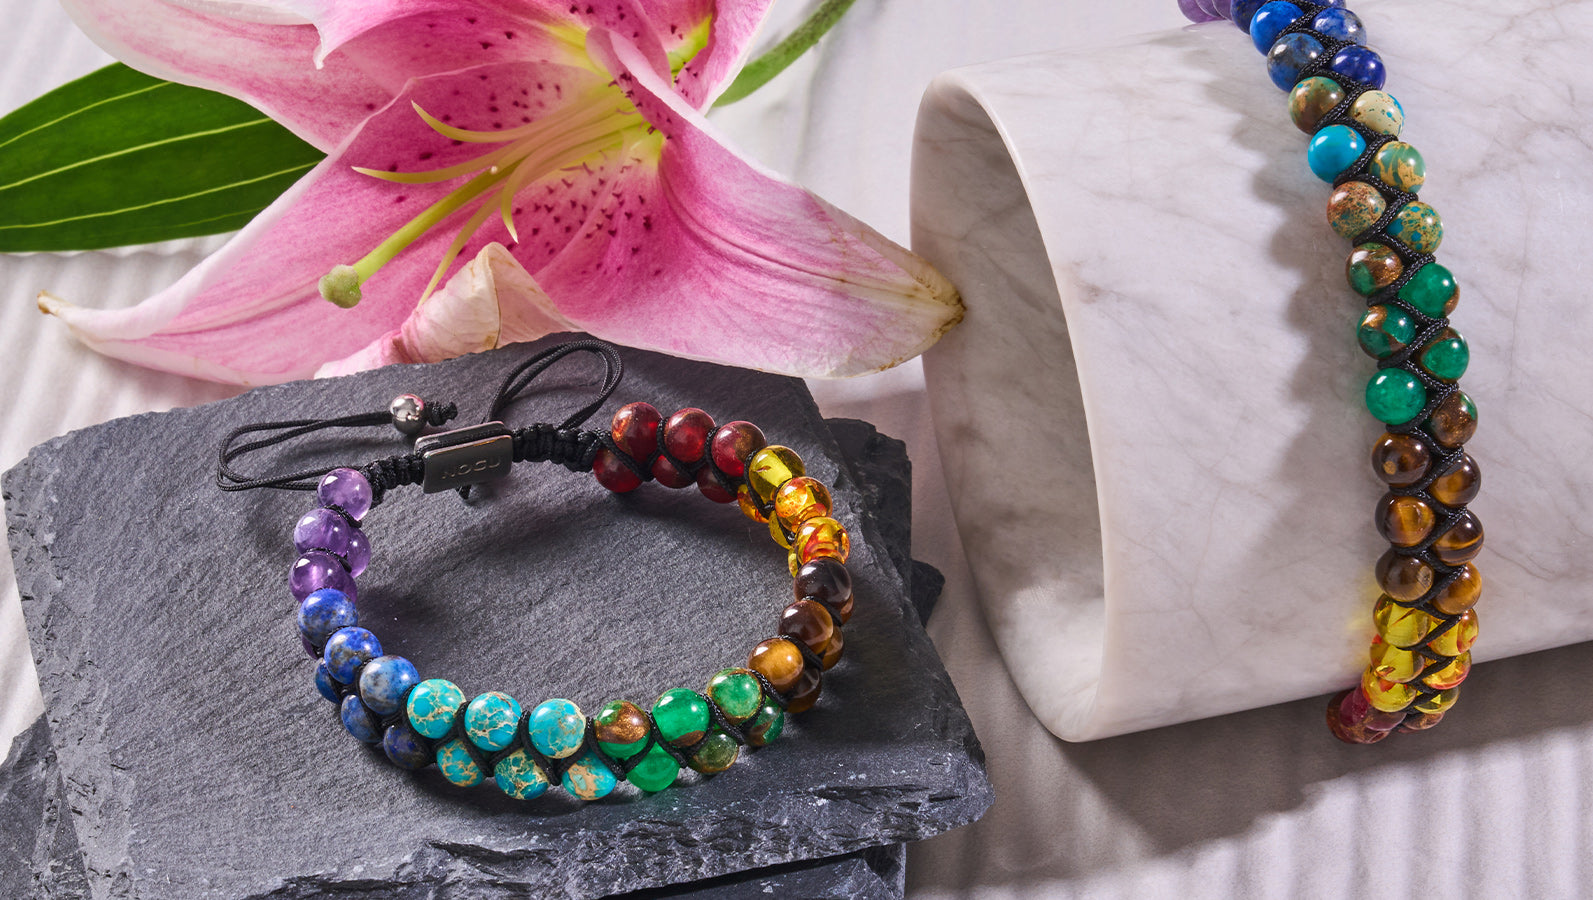 How to Make a 7 Chakra Bracelet for Healing